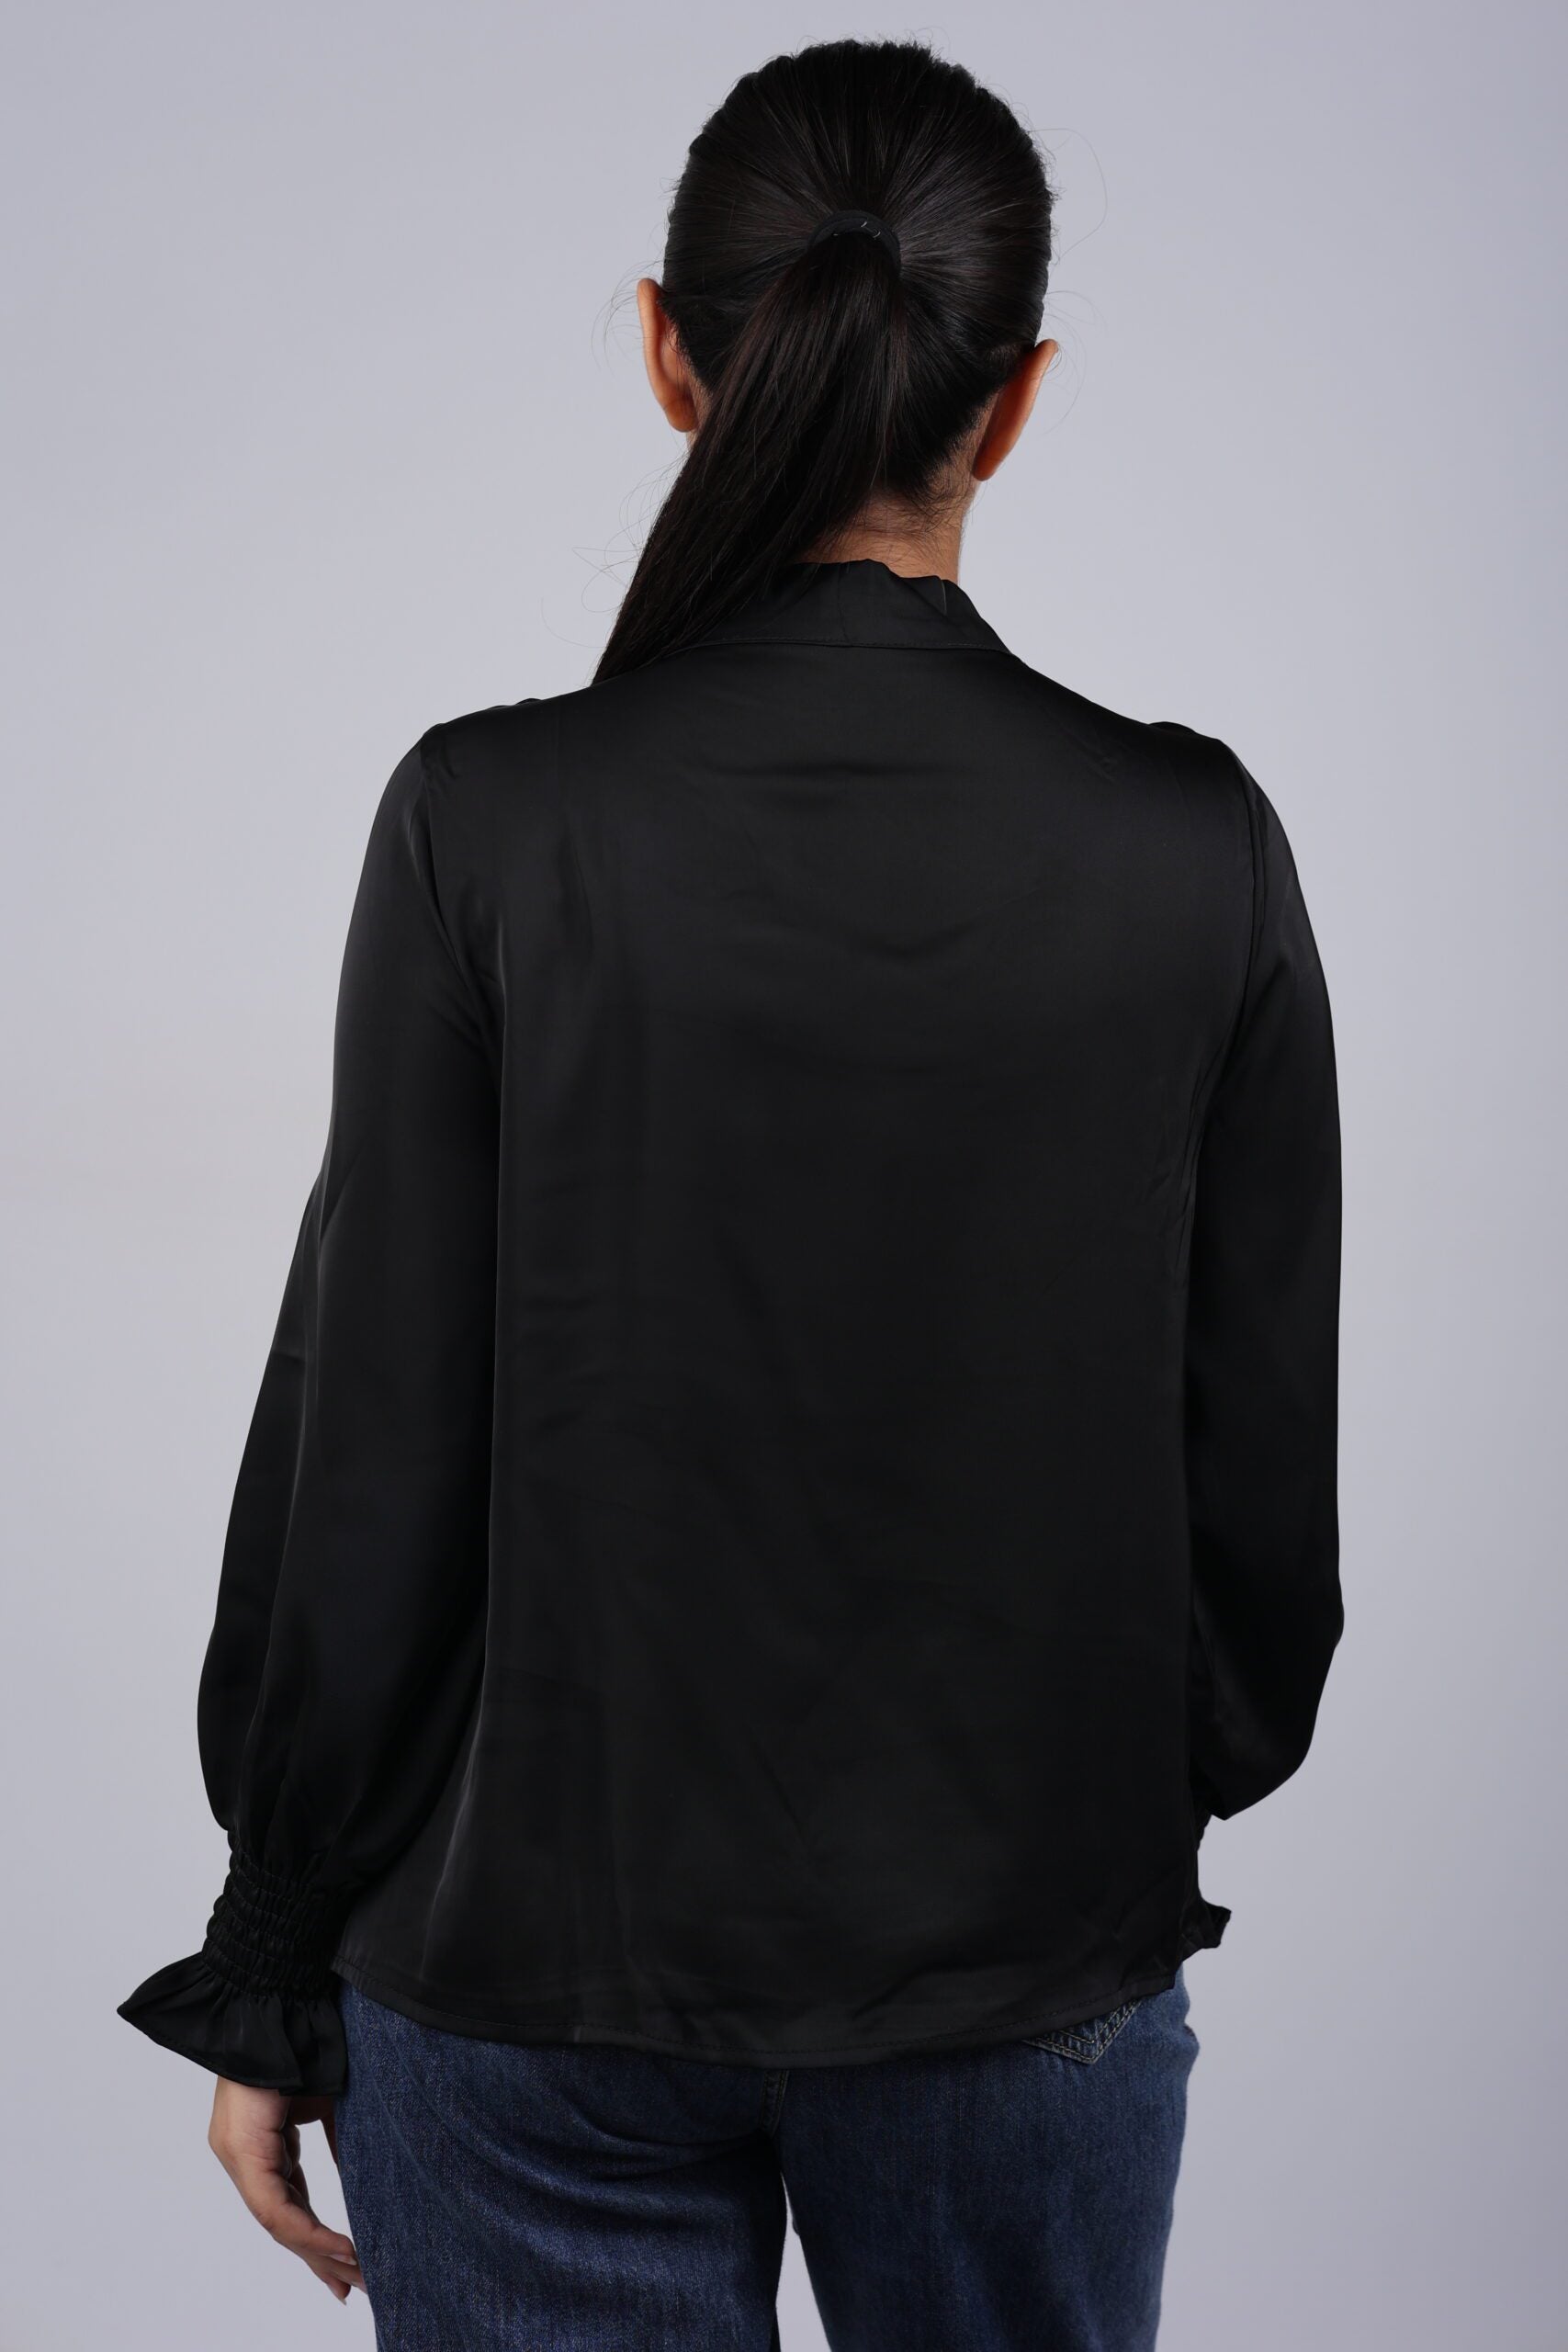 Front Rose Formal/Casual Top (Black) A Perfect Blend of Elegance and Versatility!